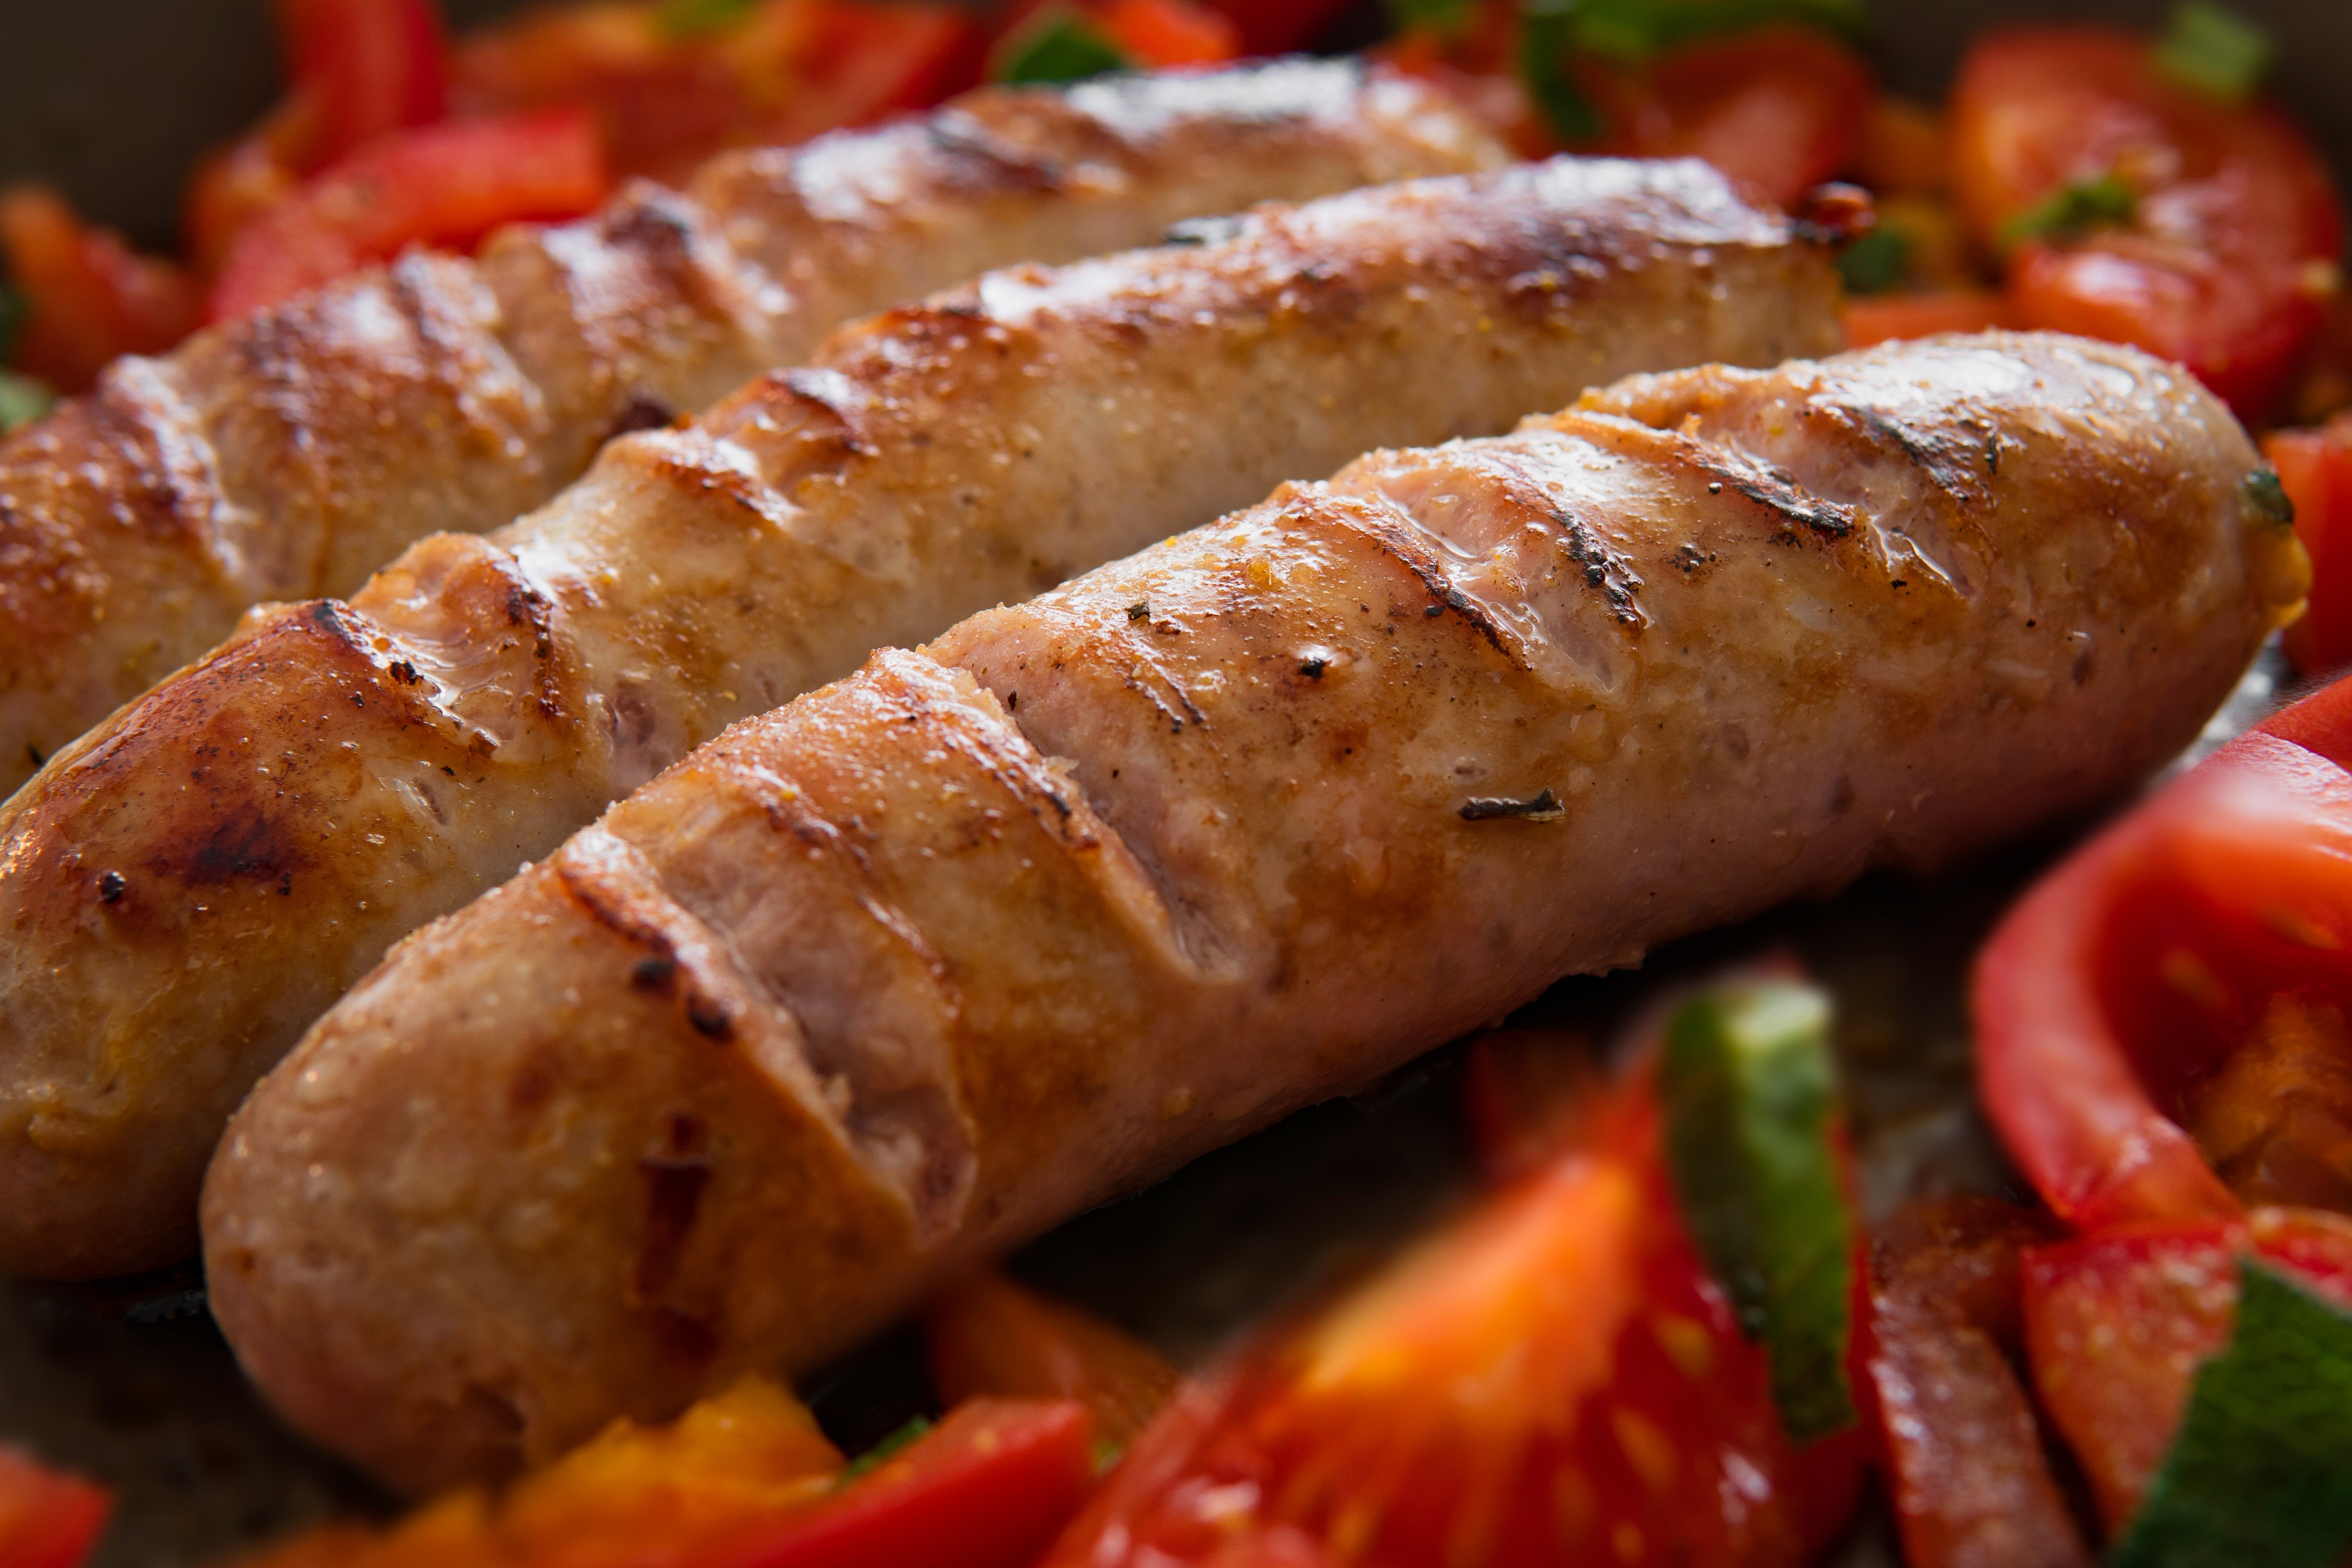 Cooked sausage photo